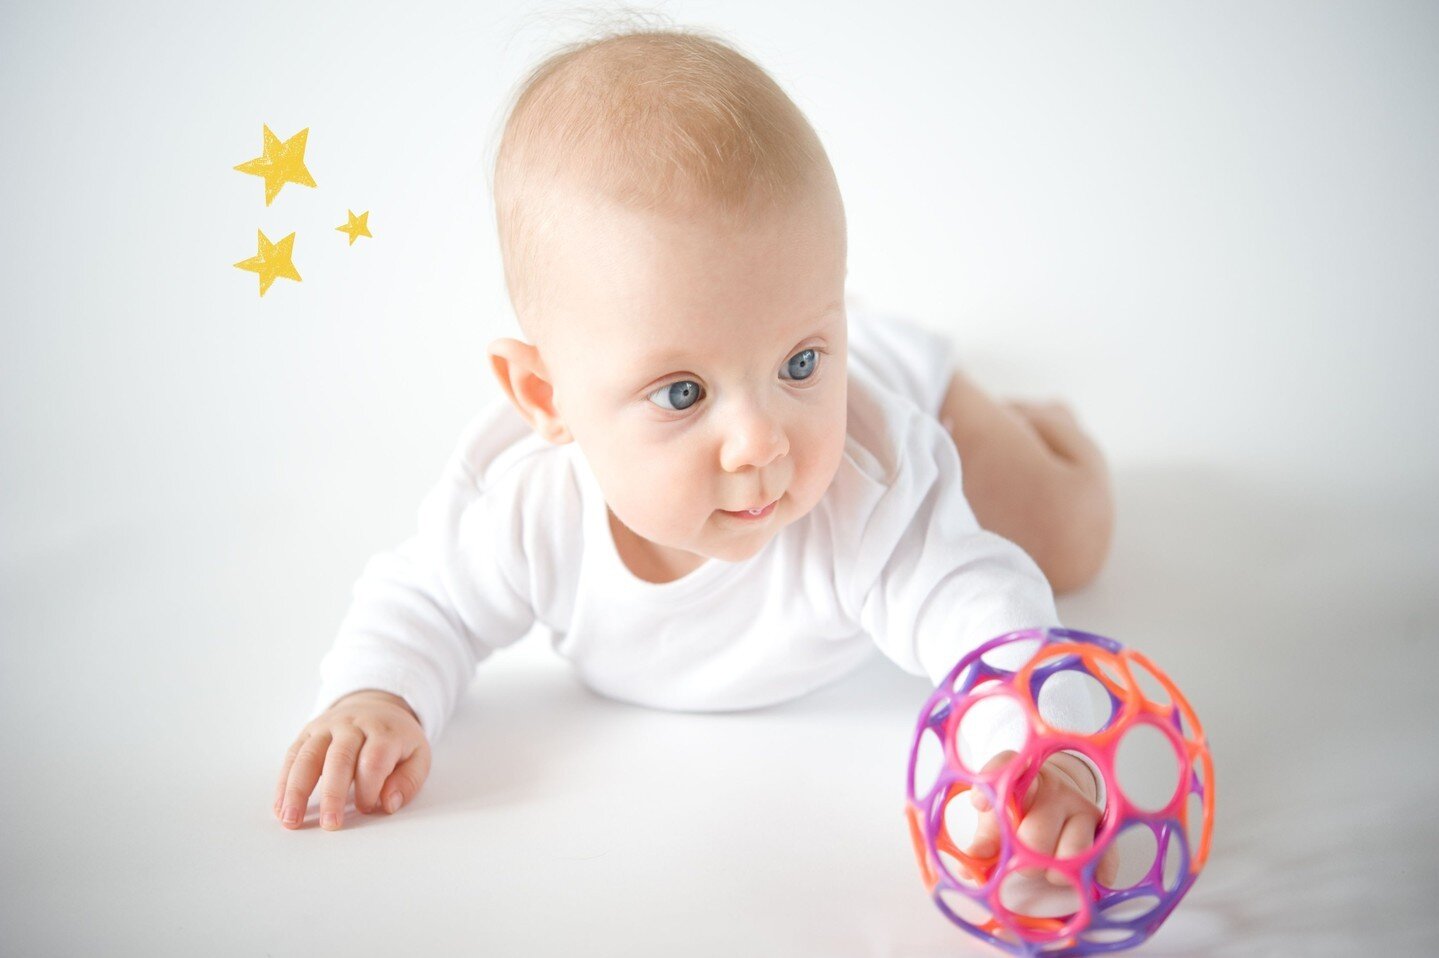 As young children grow and develop, they need to work towards more time in active
play, less time sitting and sufficient sleep each day to be healthy. The Australian Government have developed a guideline to assist parents to create healthy and safe r